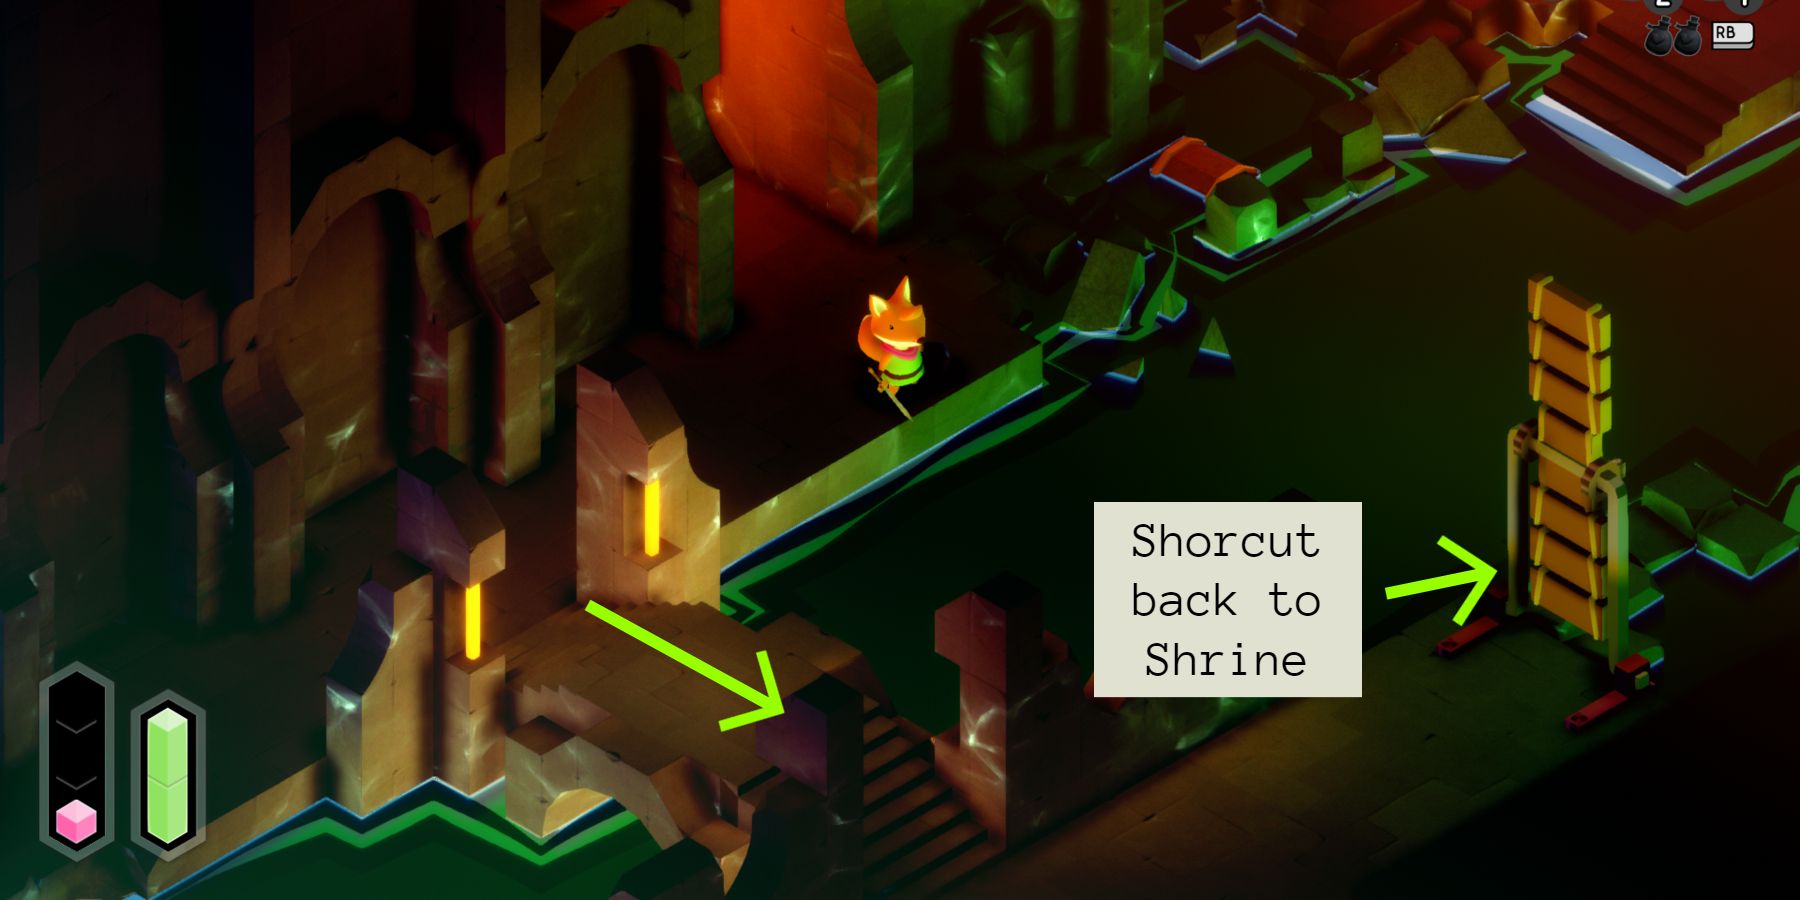 a red fox standing in an underground chamber with shallow water. a green arrow points over a stone bridge to the left while another points to an upright bridge on the right with a text box nearby that reads "shortcut back to shrine" 